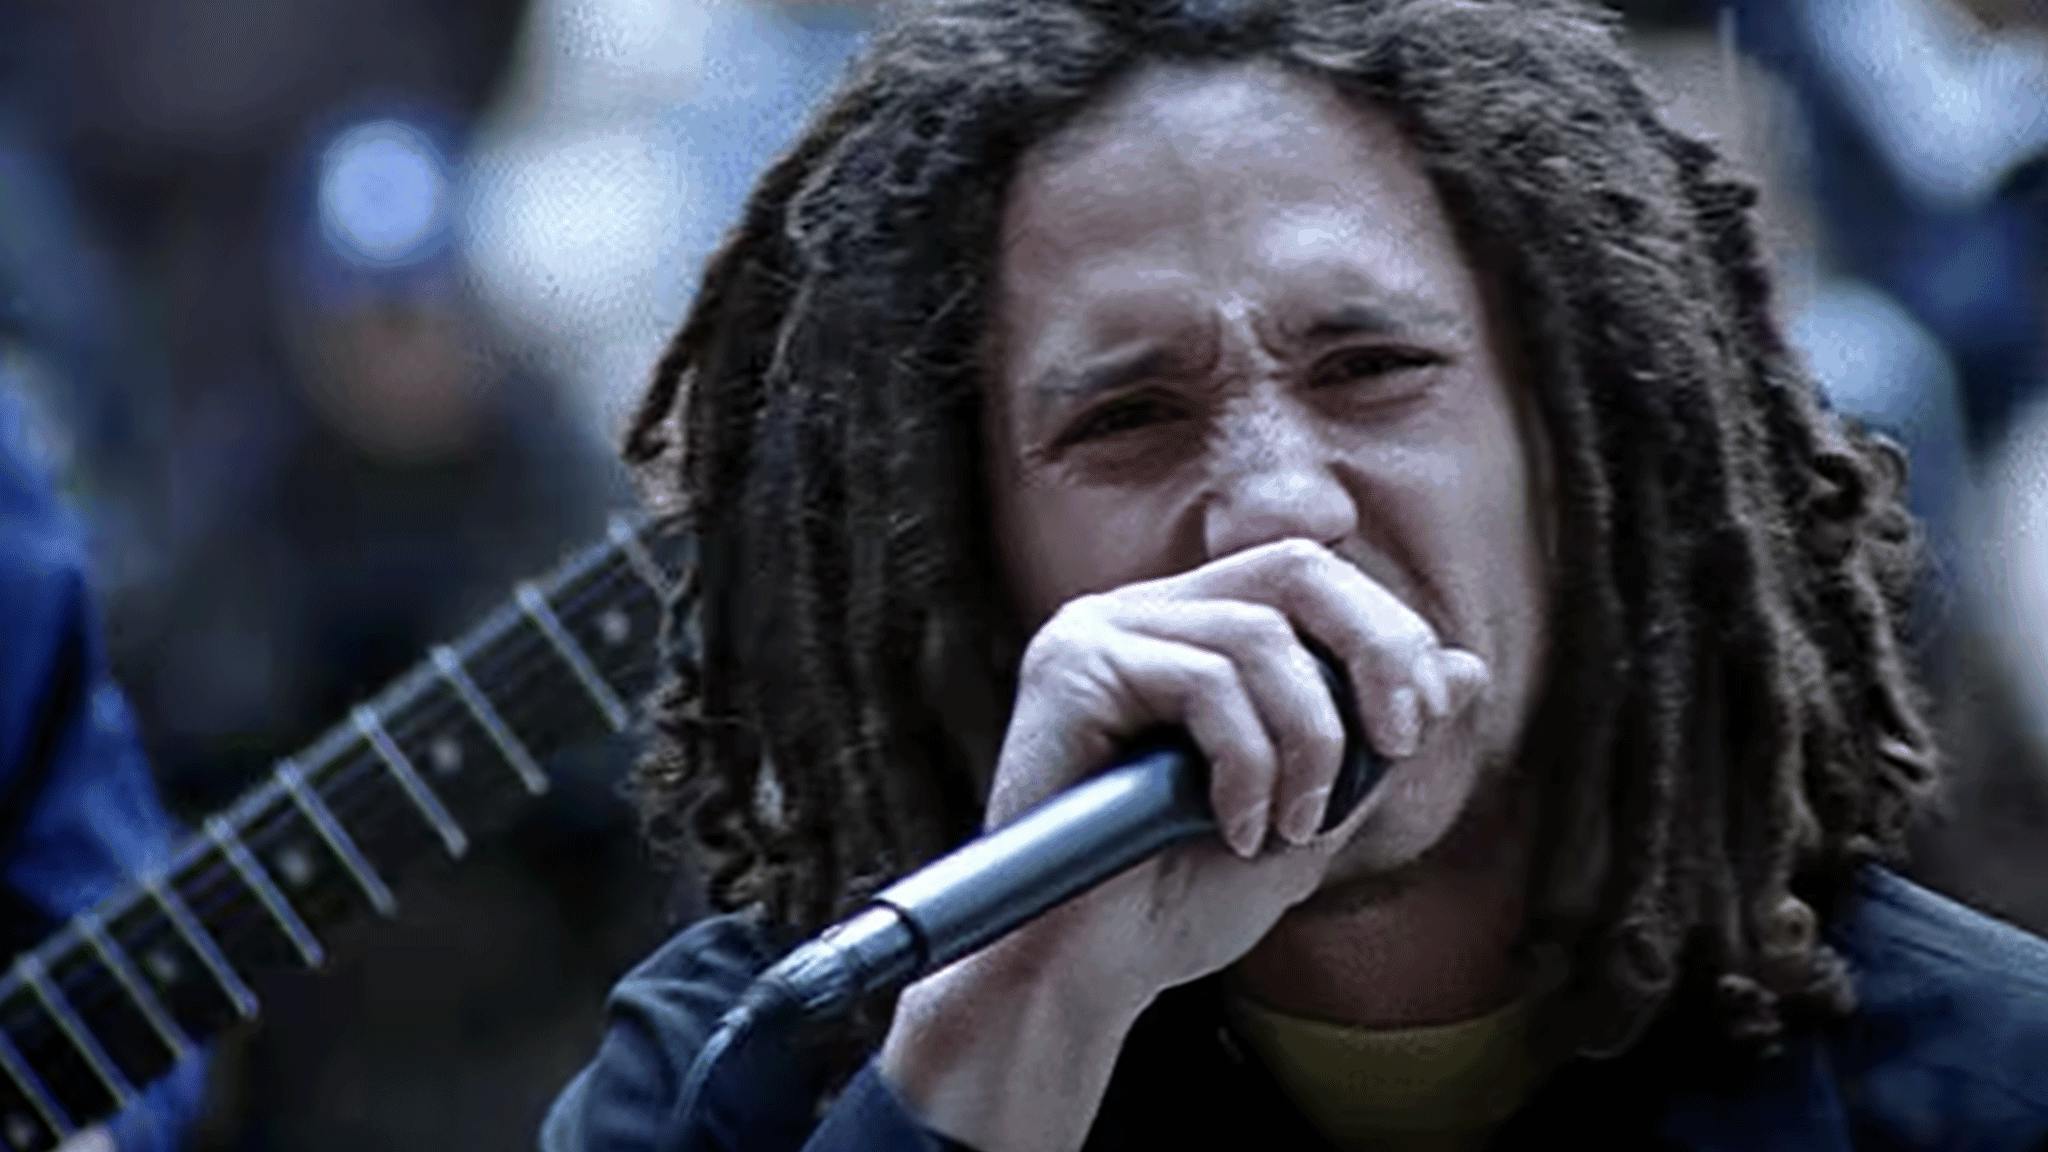 A deep dive into Rage Against The Machine’s video for Sleep Now In The Fire